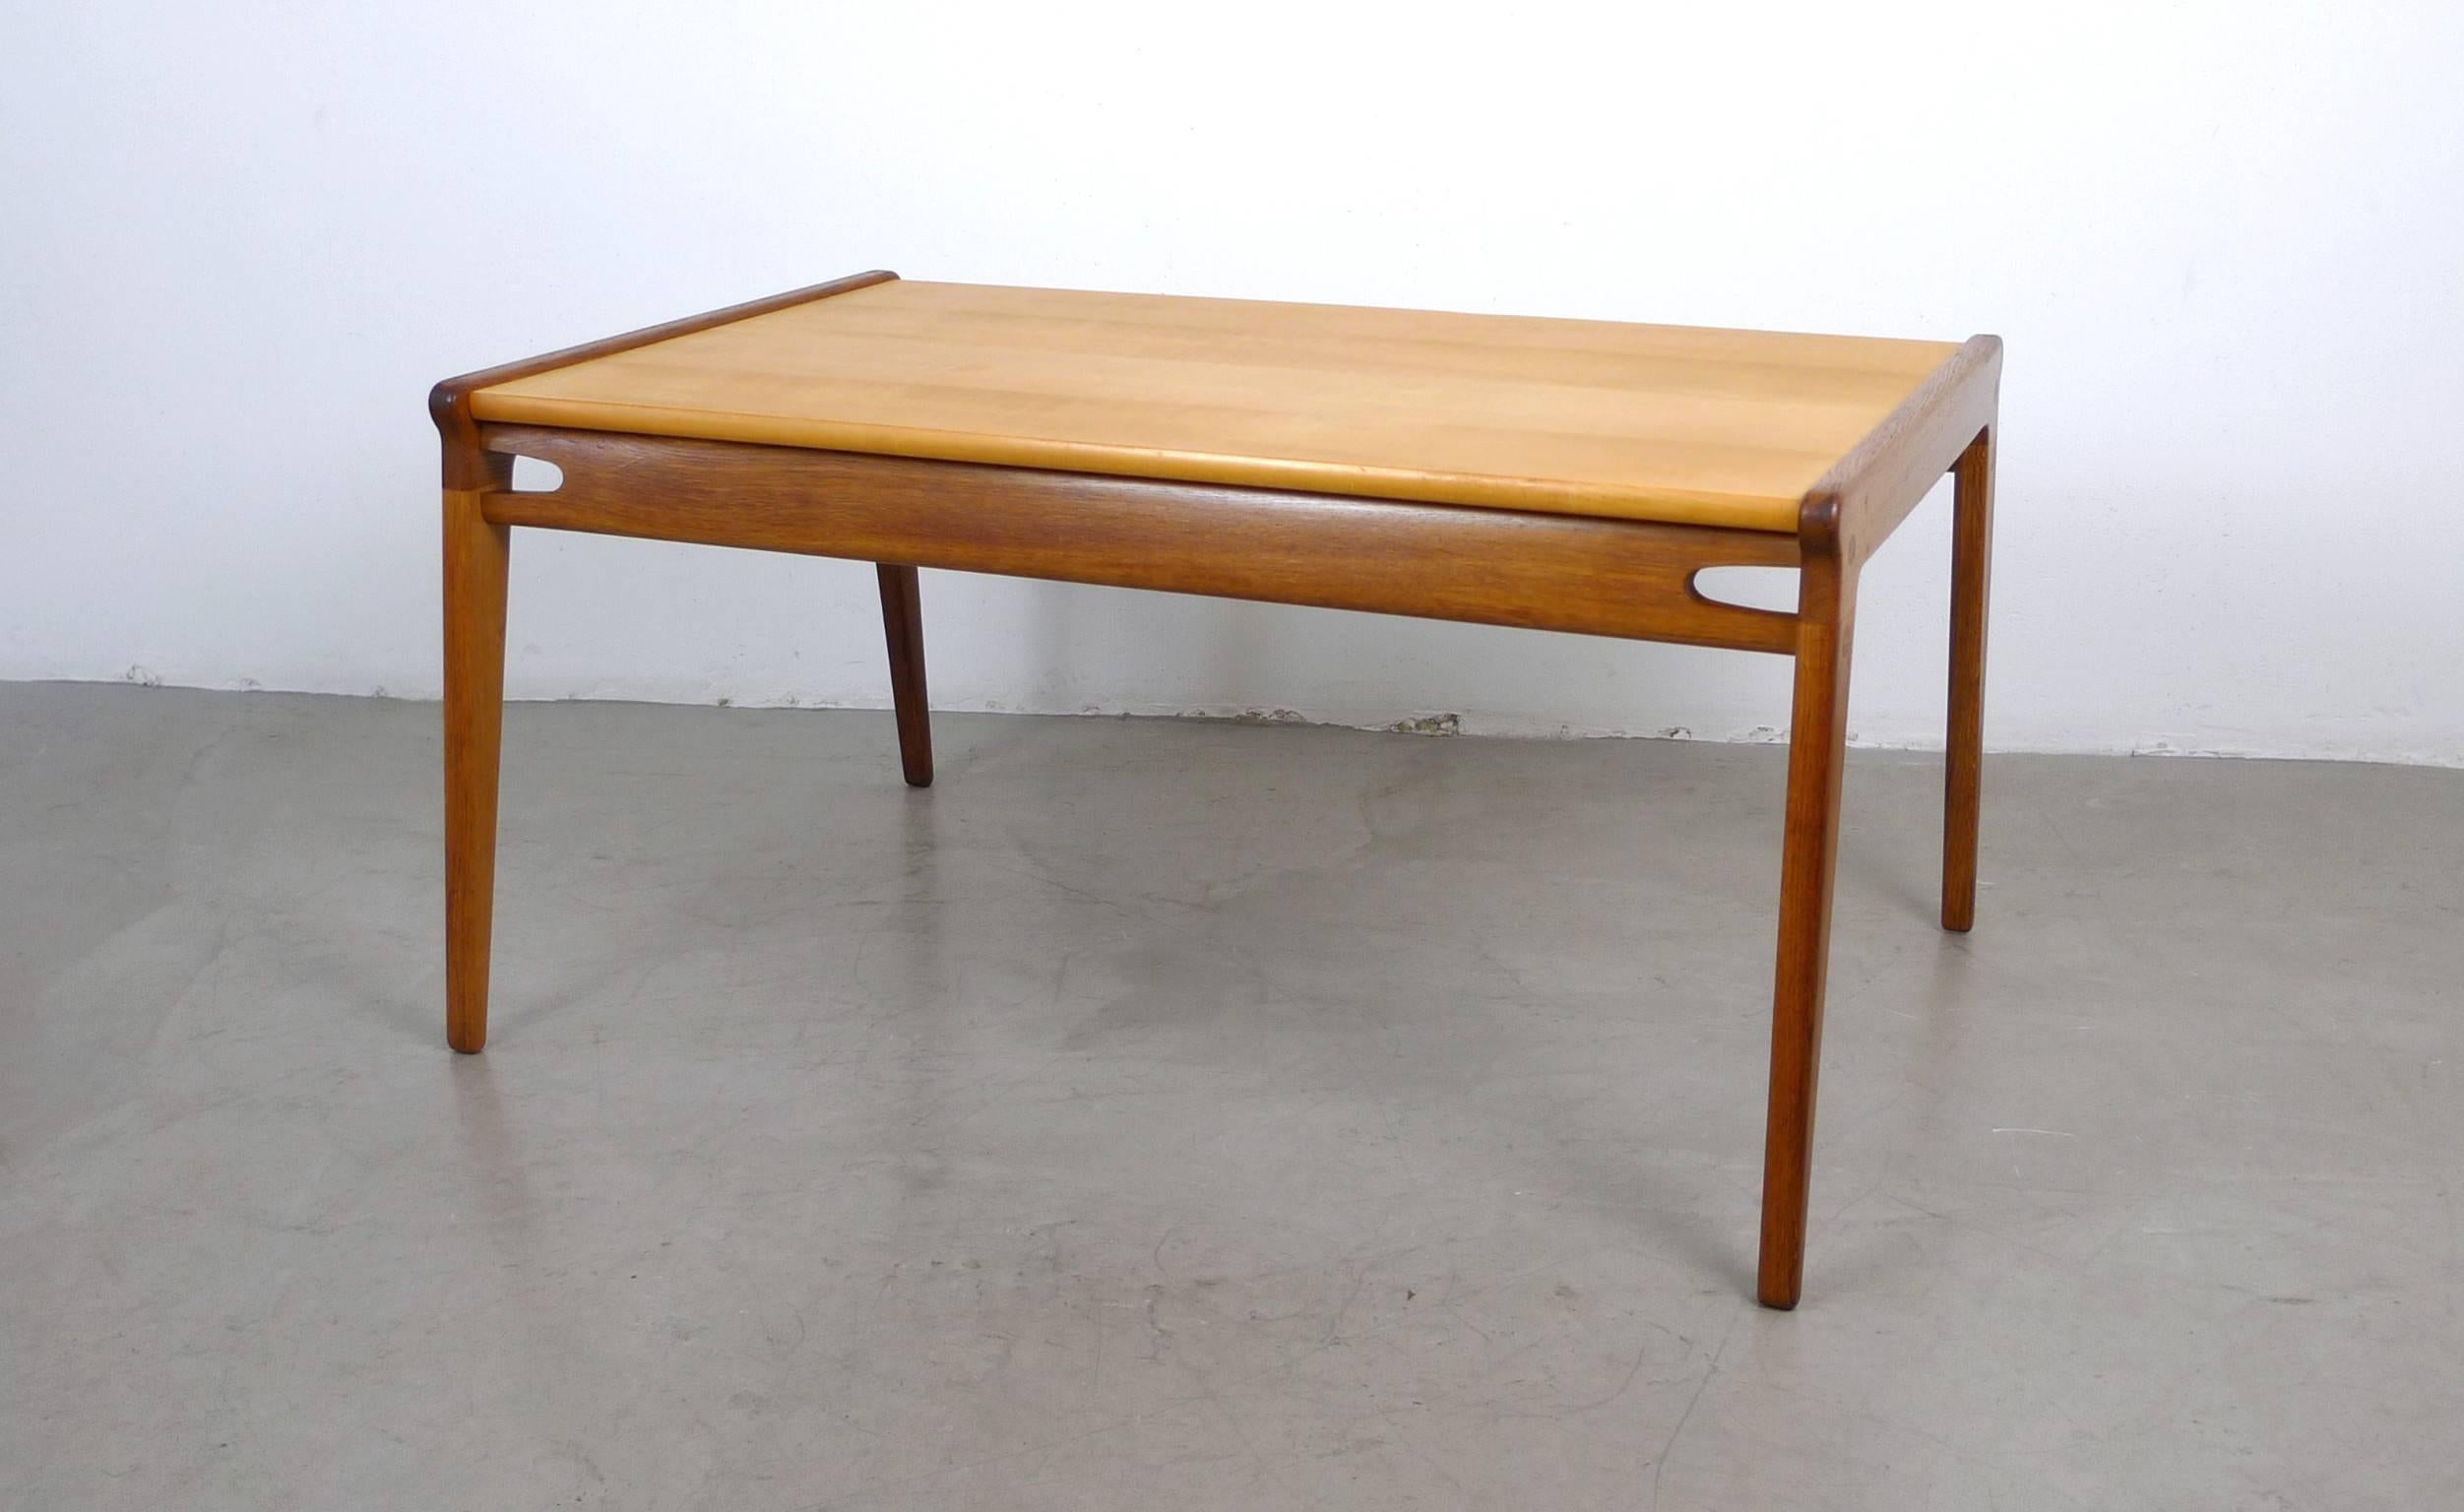 Maple 1950s Coffee Table from Germany